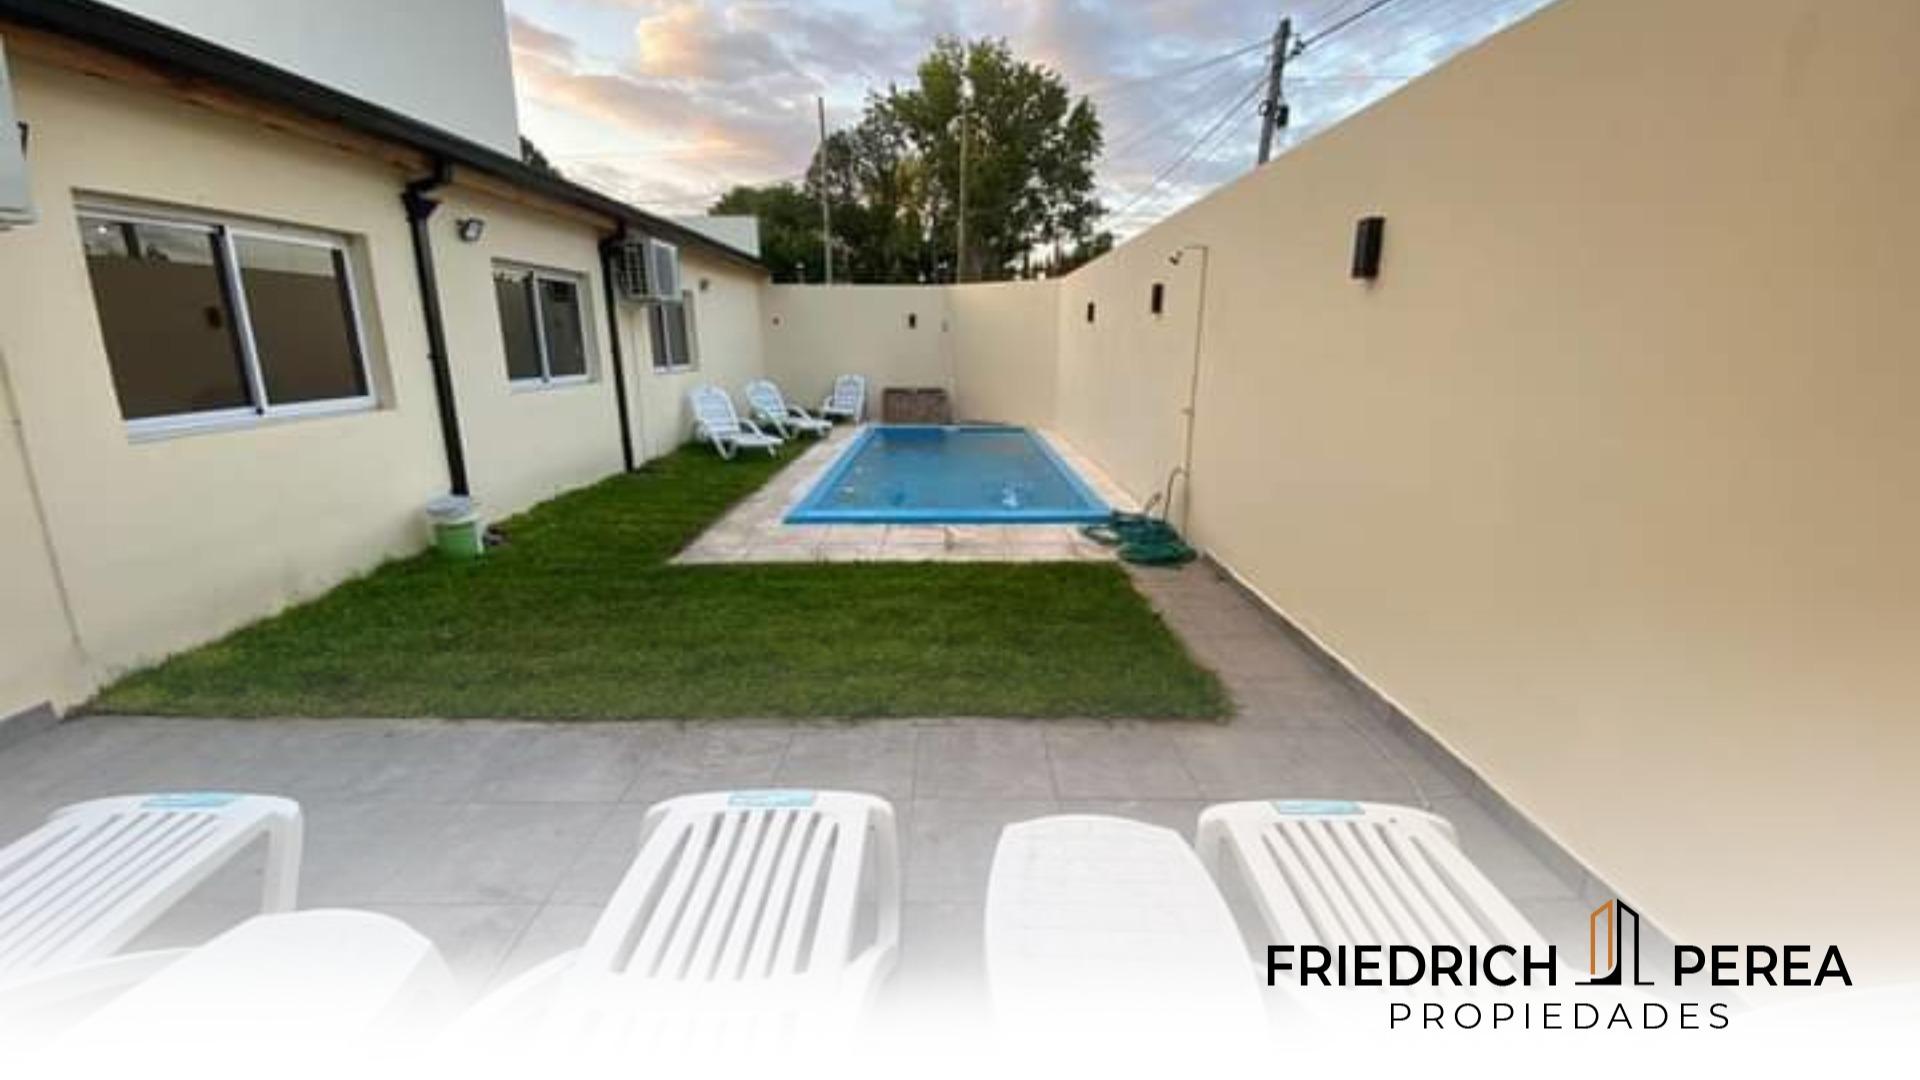 #4957301 | Sale | Country House | General Rodriguez (Friedrich Propiedades)